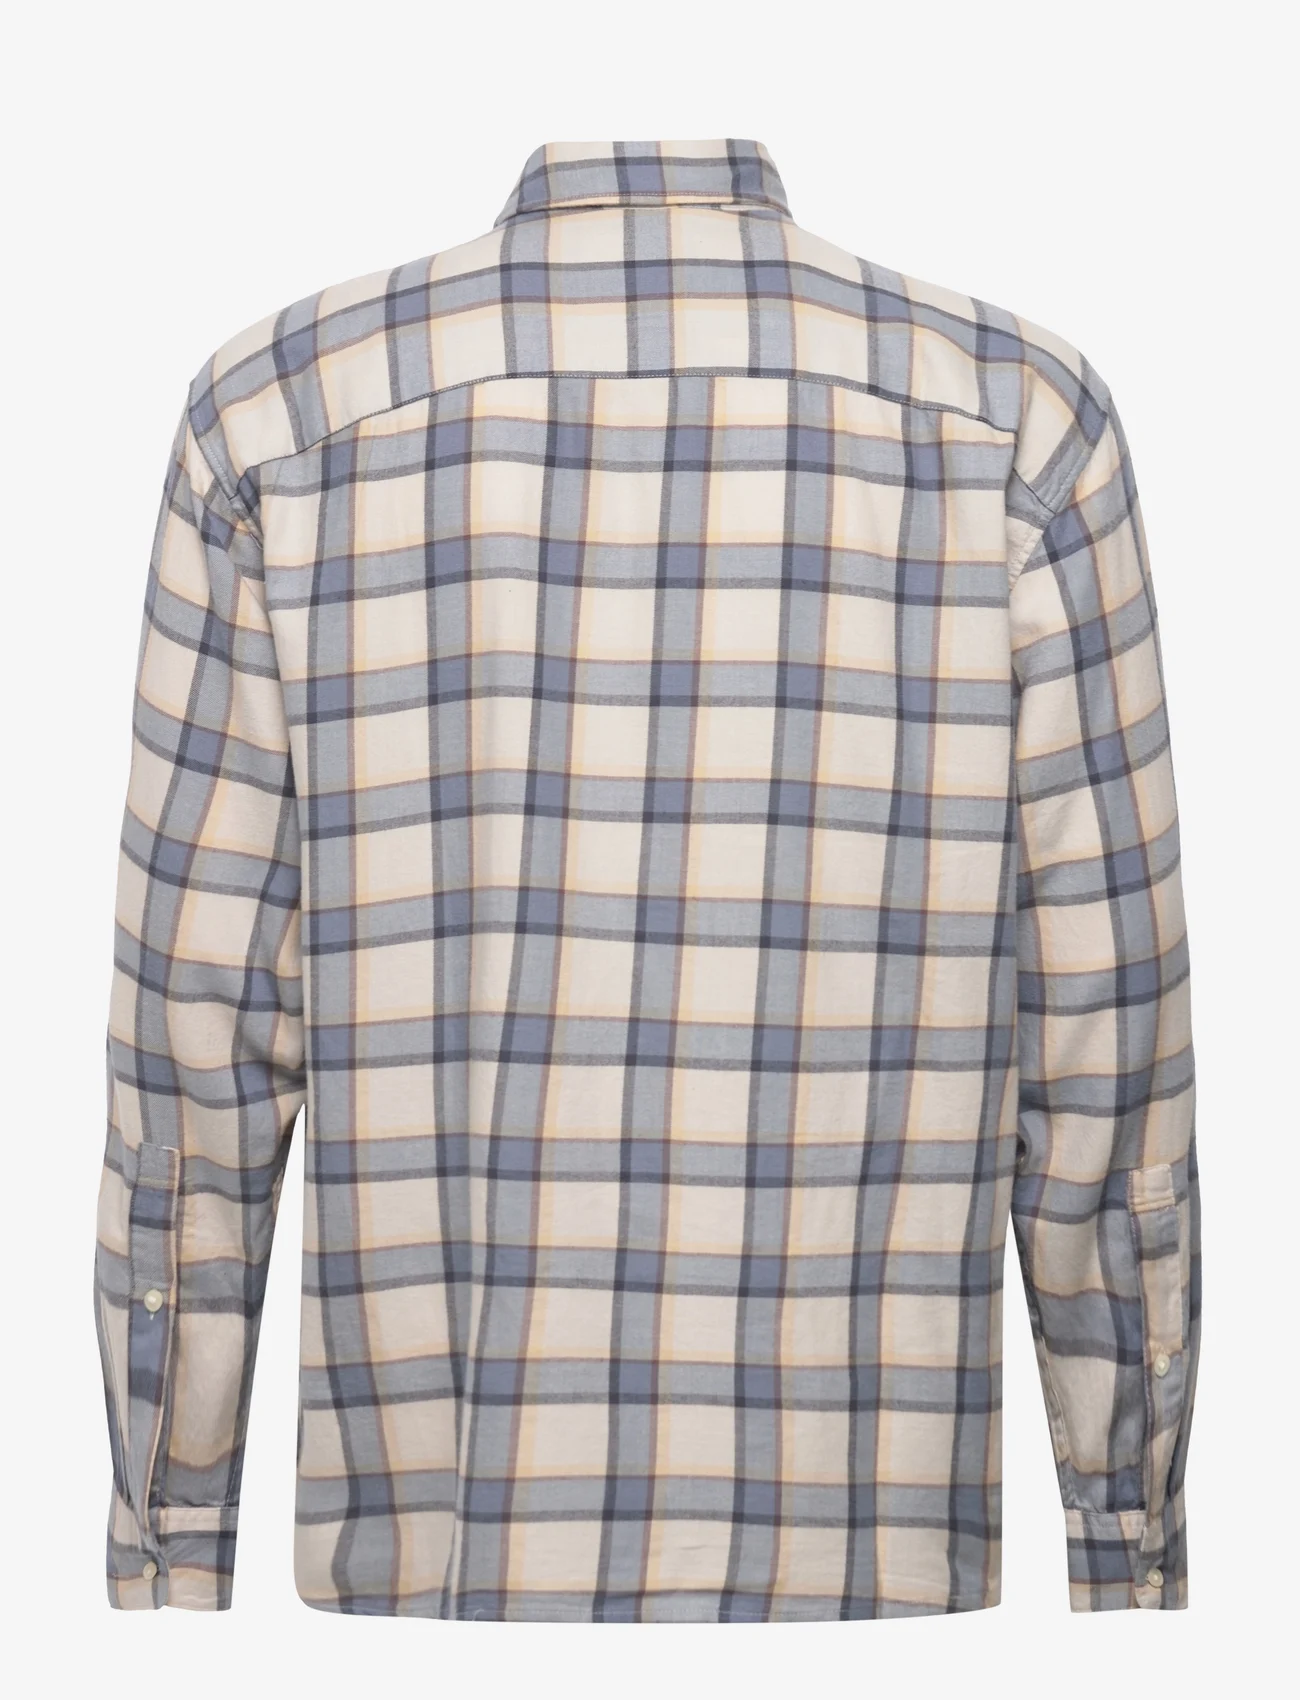 Abercrombie & Fitch - ANF MENS WOVENS - ternede skjorter - white plaid - 1